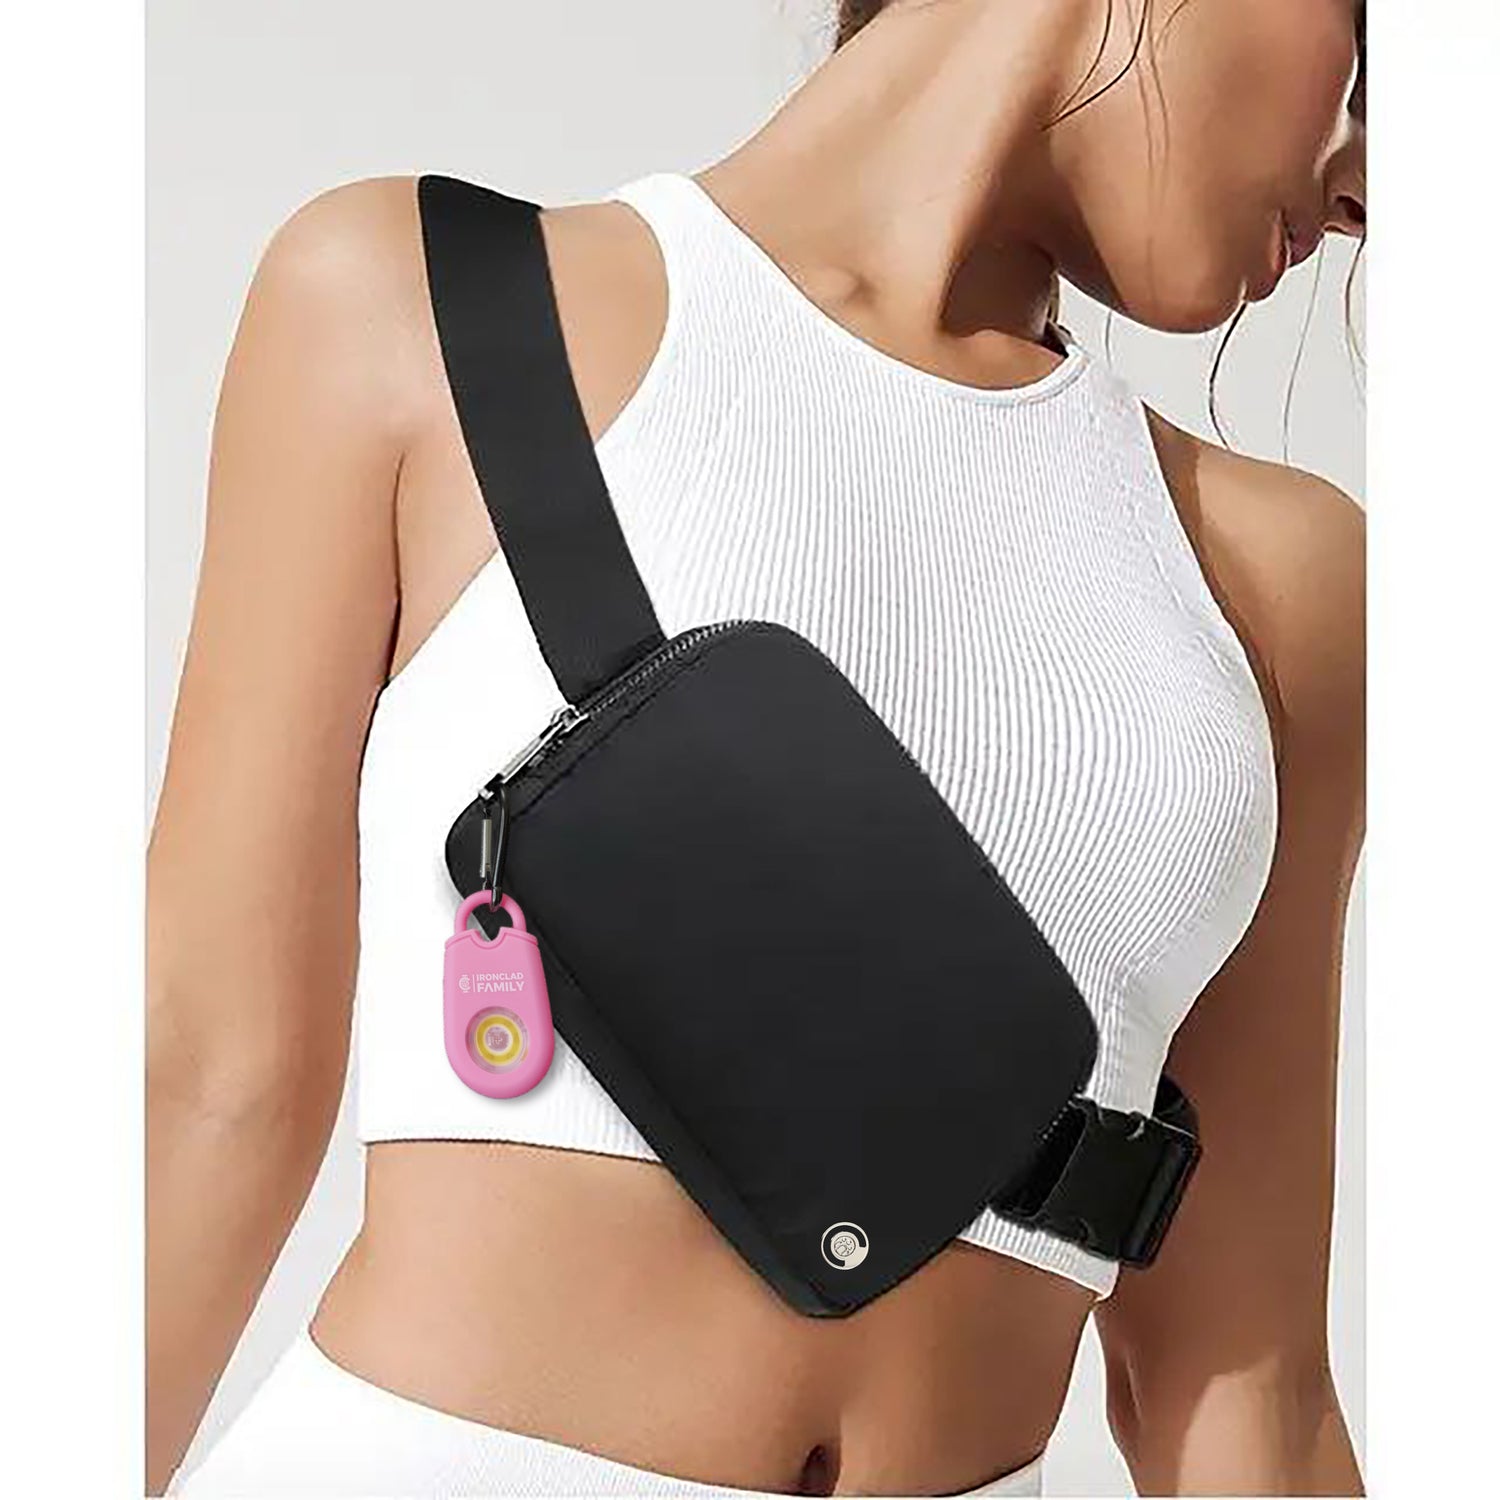 Personal alarm waist bag with a pink keychain